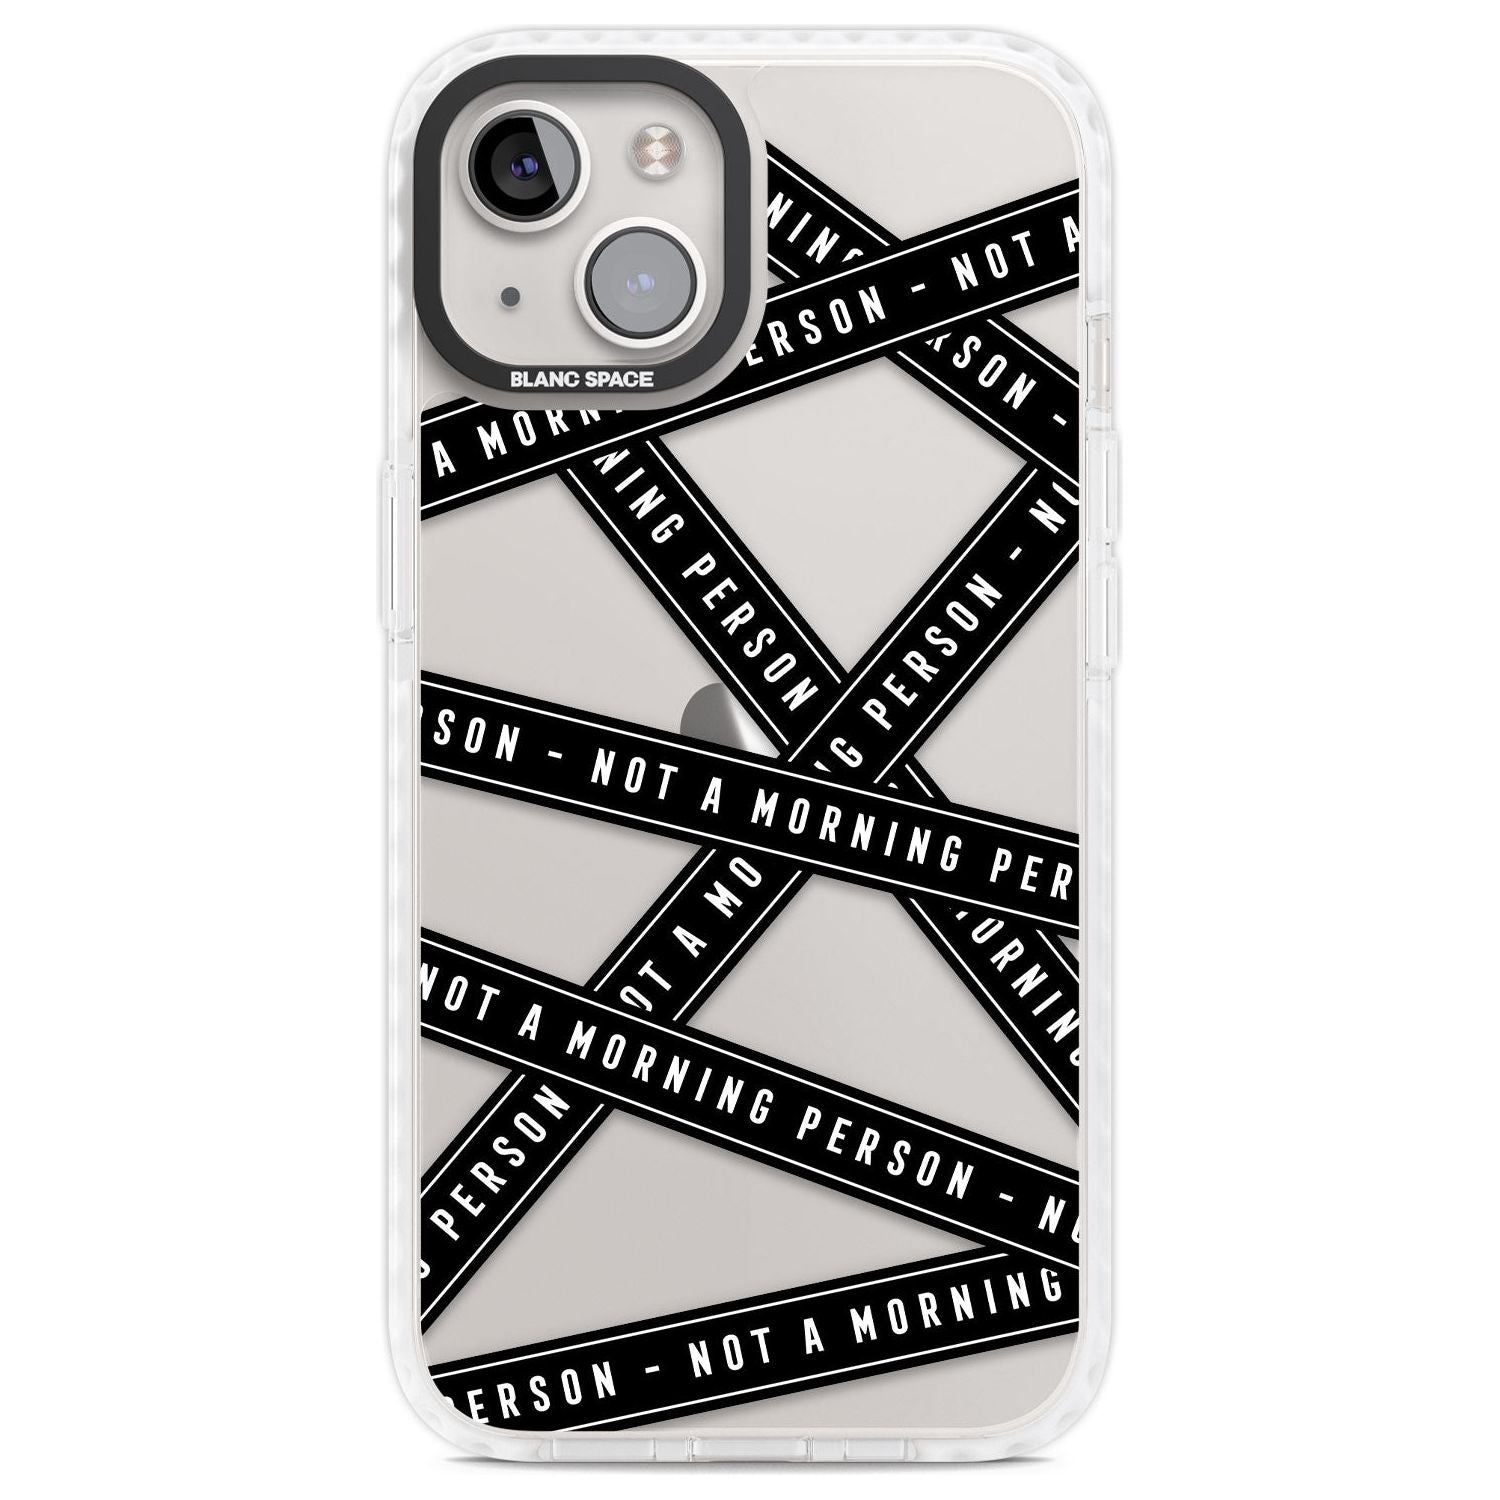 Caution Tape (Clear) Not a Morning Person Phone Case iPhone 13 / Impact Case,iPhone 14 / Impact Case,iPhone 15 Plus / Impact Case,iPhone 15 / Impact Case Blanc Space